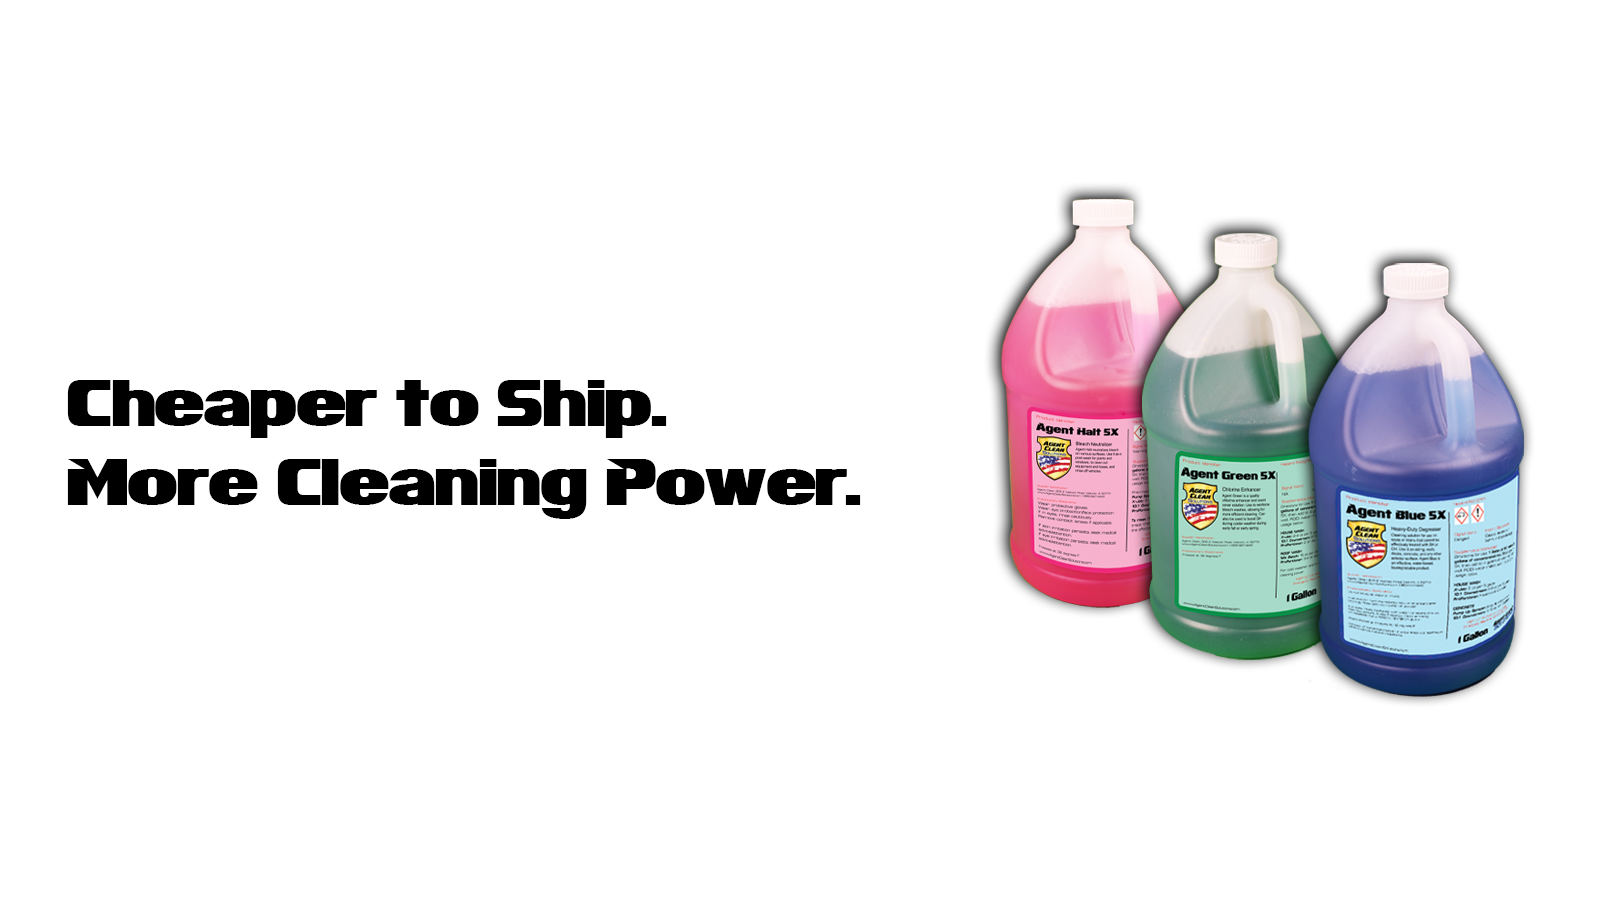 Agent Clean Solutions 5X Formula saves you money on shipping